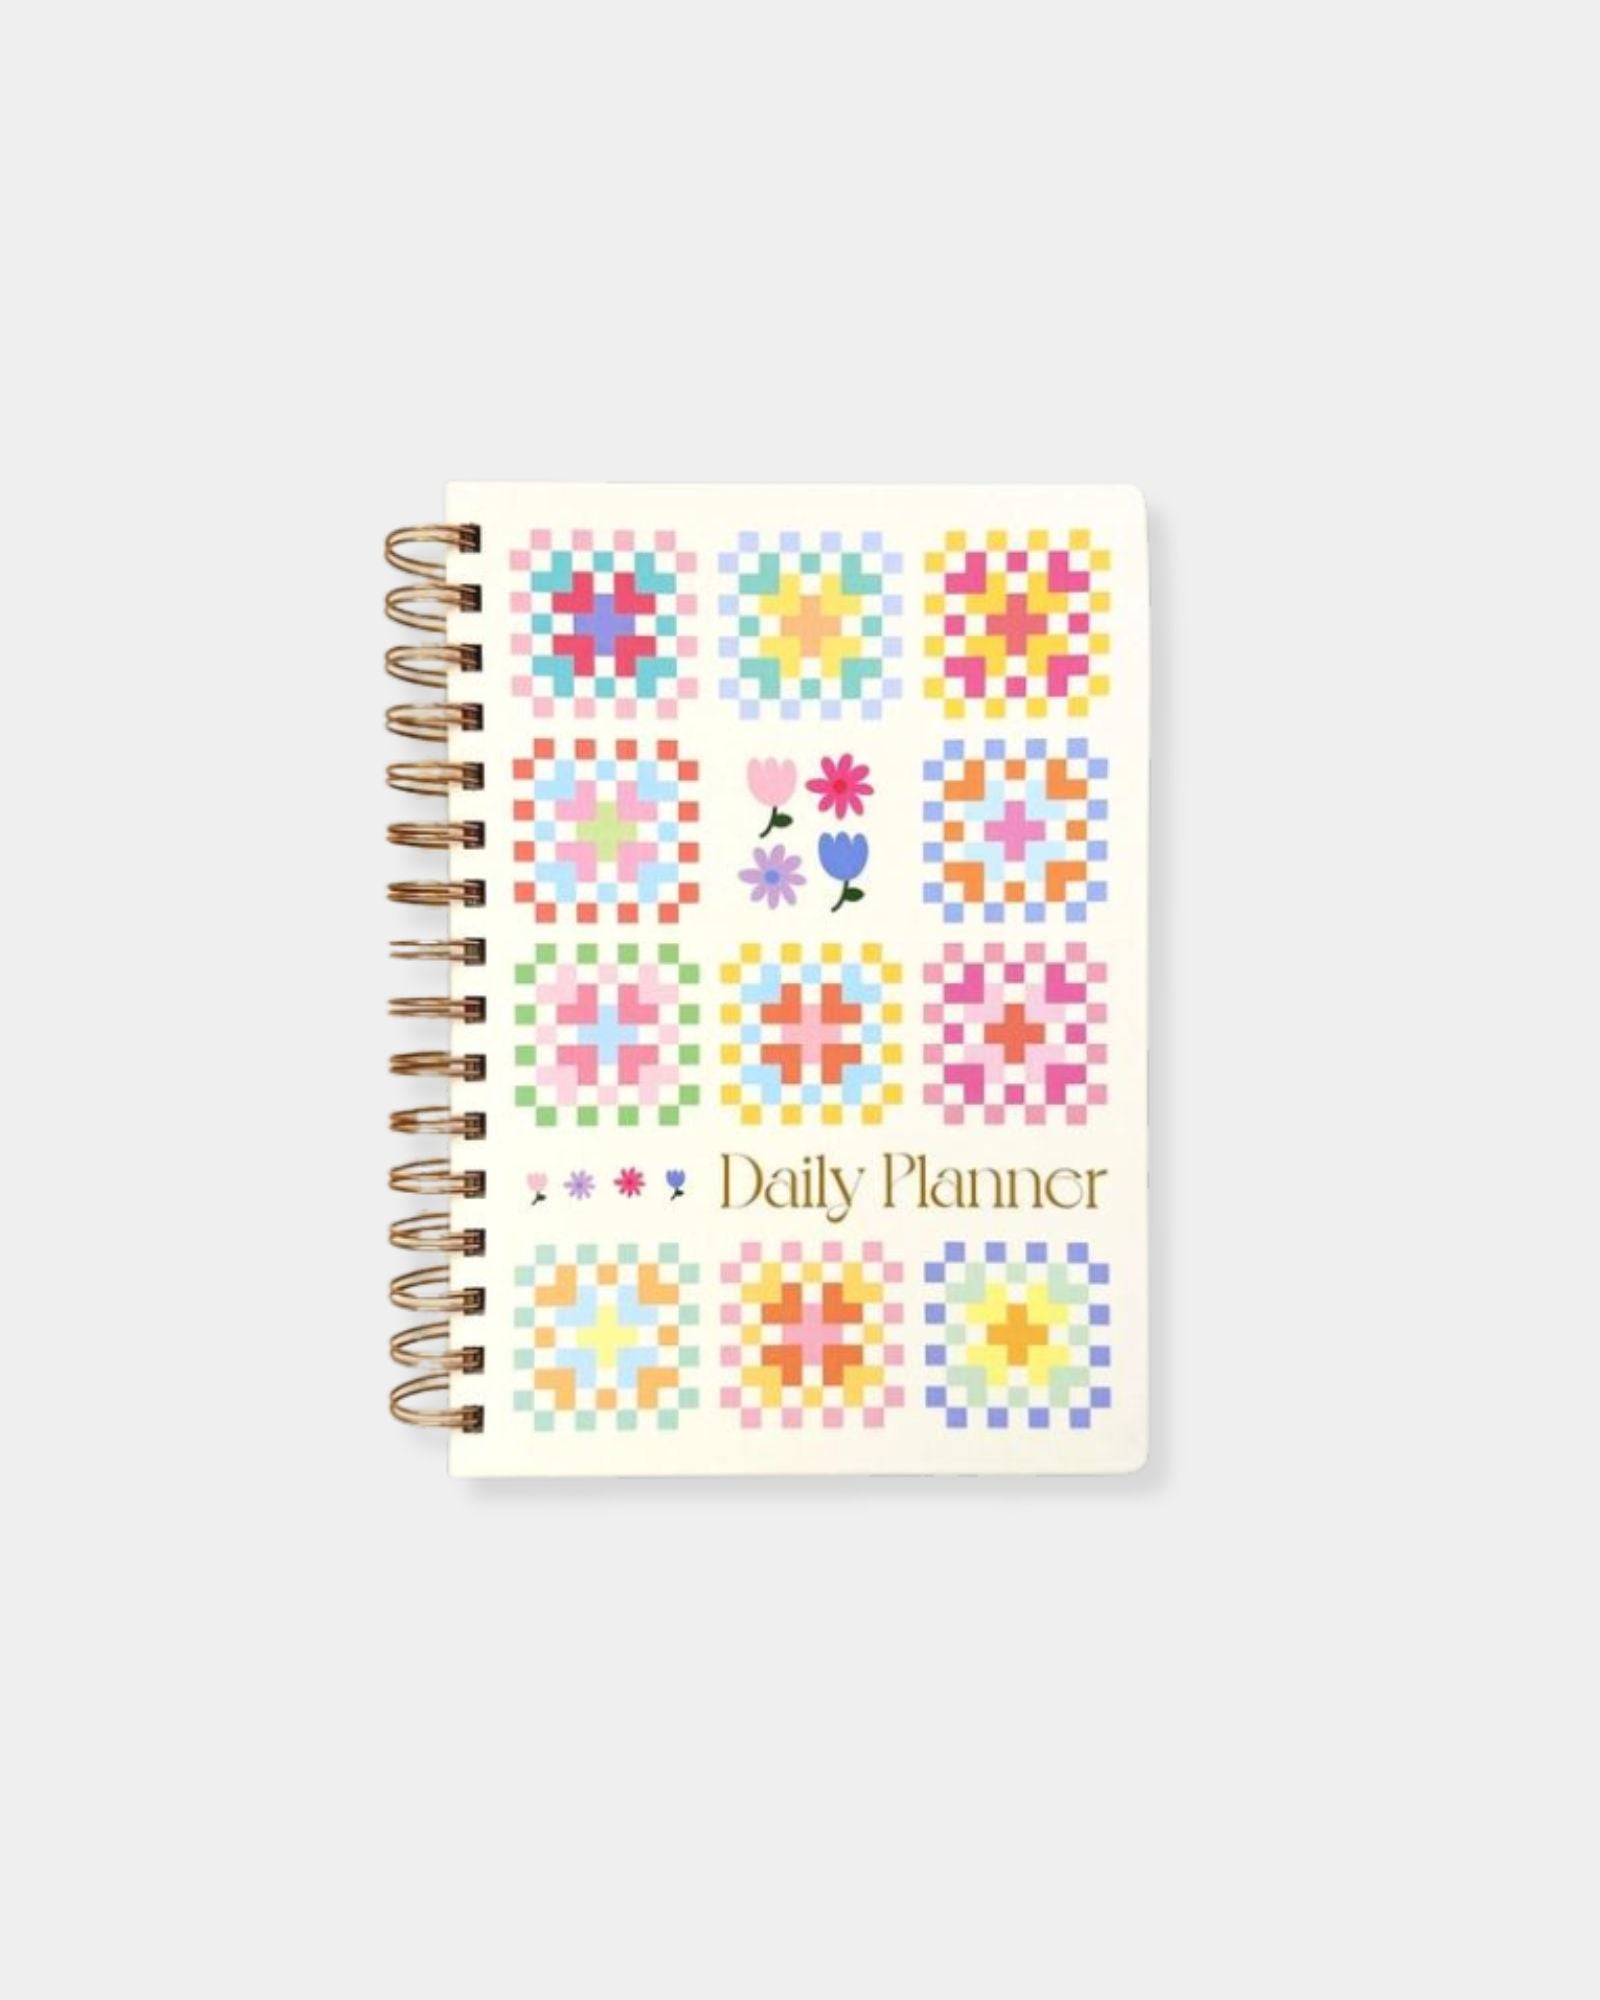 TULIP TOWN - DAILY PLANNER